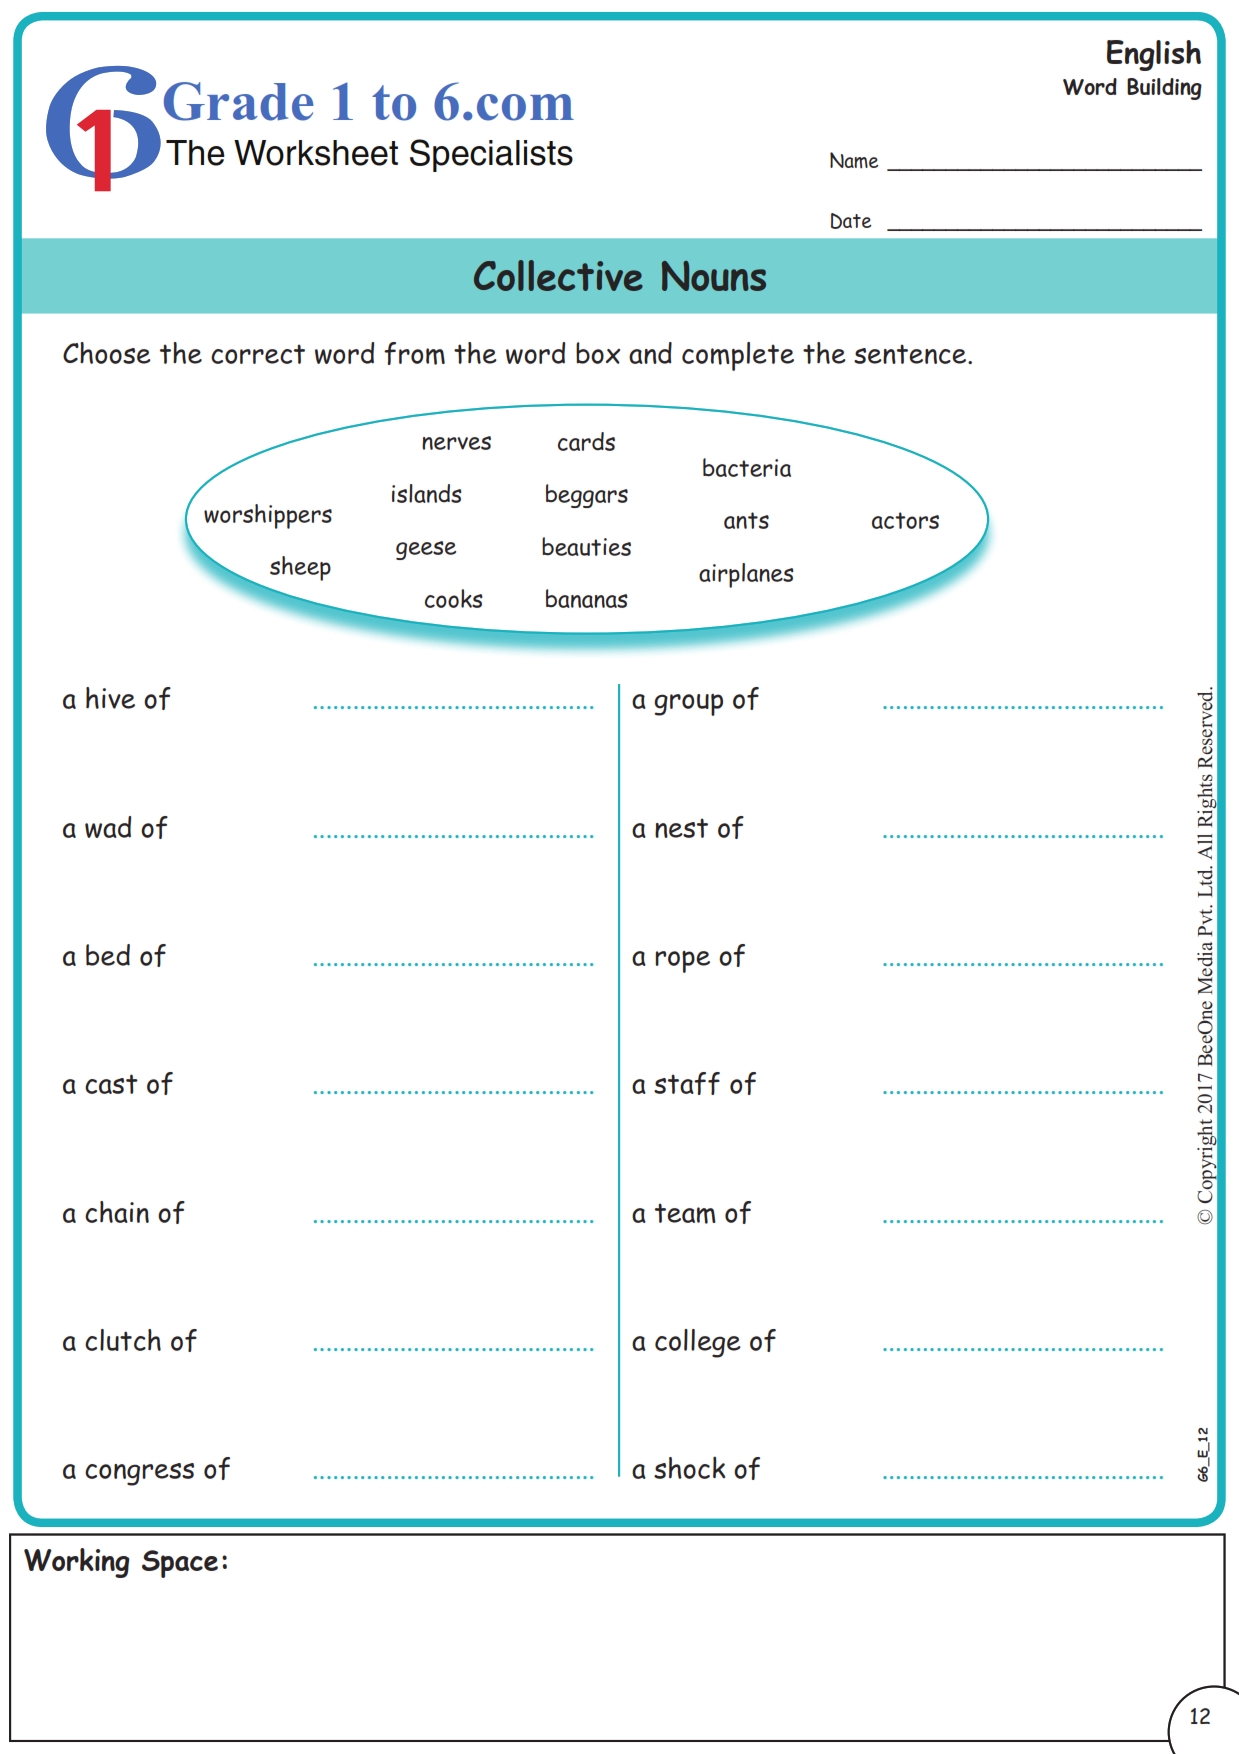 collective nouns exercises and worksheet grade 6